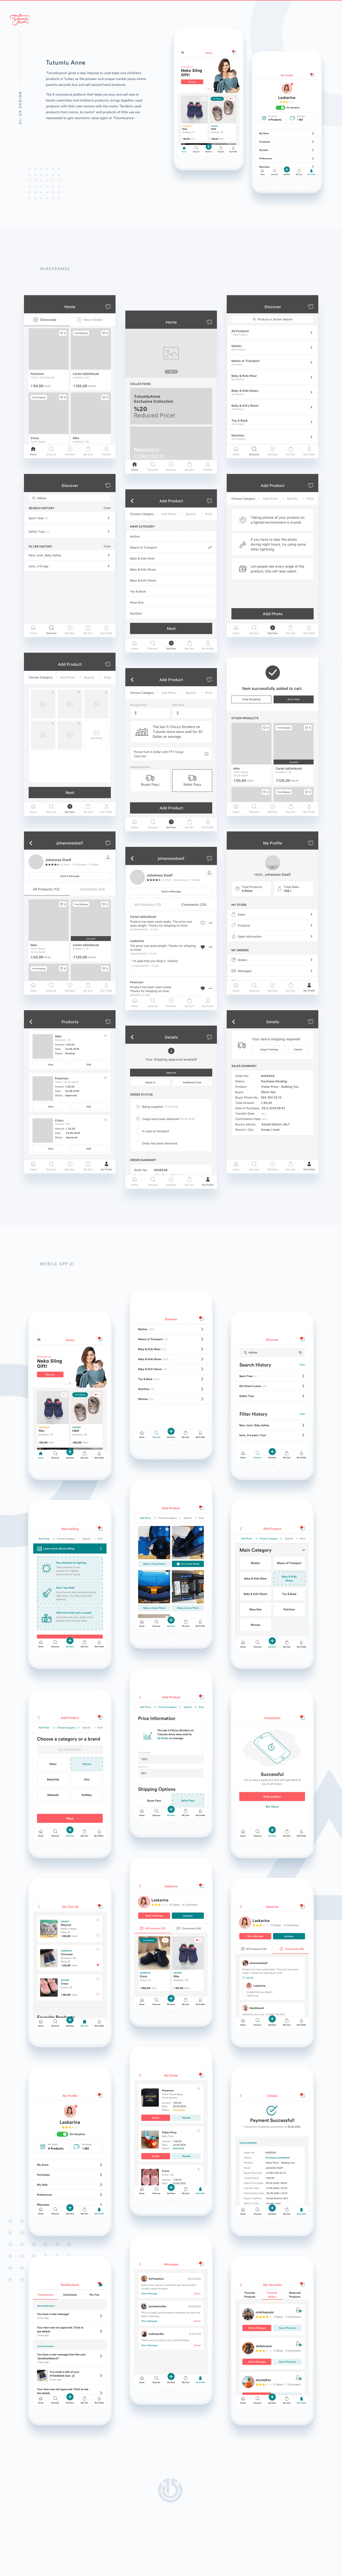 design Interface Marketplace mobile Mobile app products UI ux wireframe